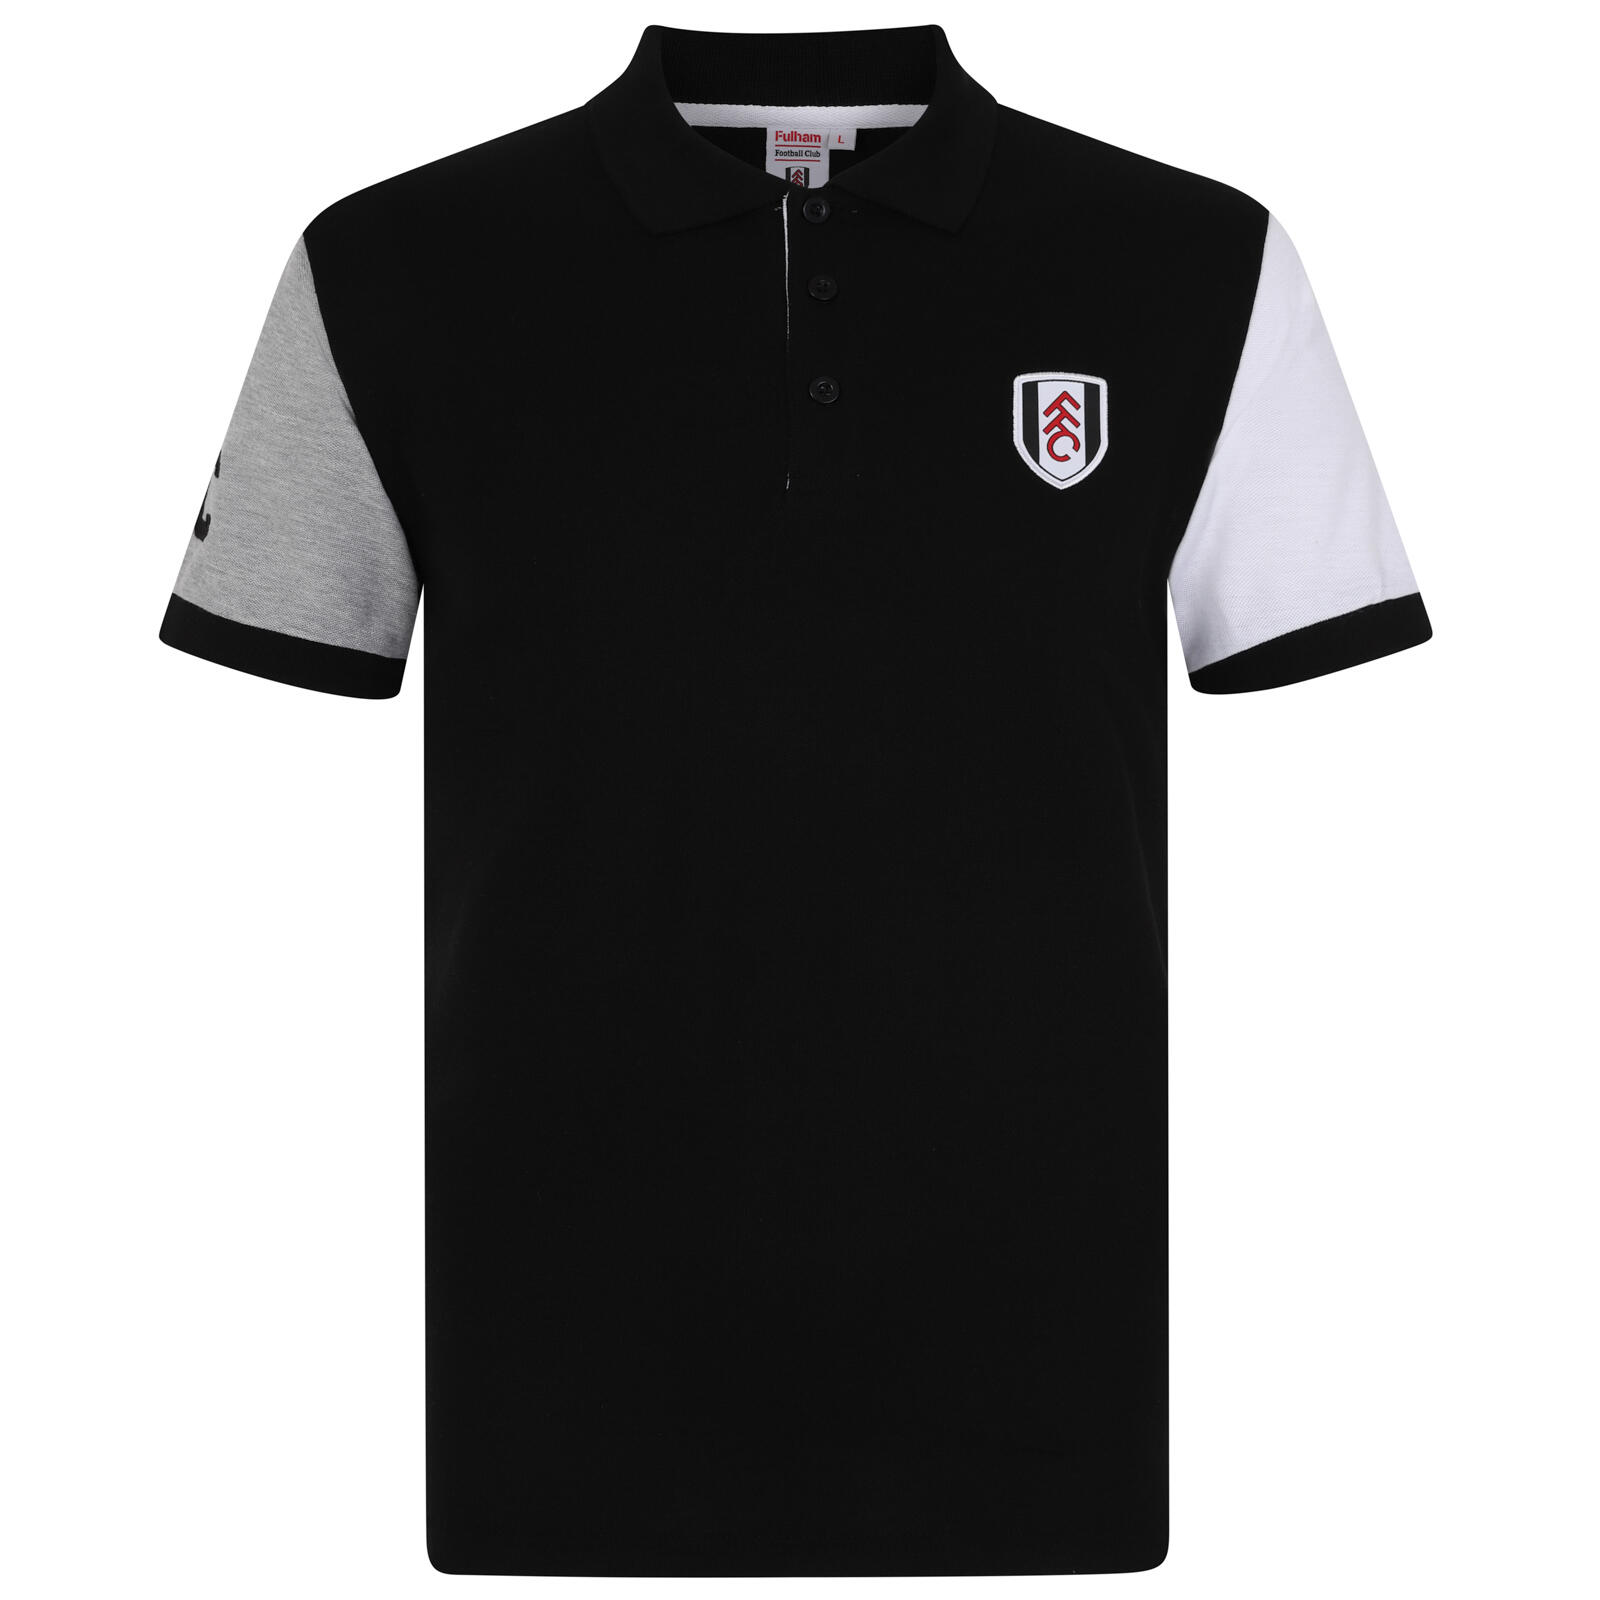 FULHAM FC Fulham FC Mens Polo Shirt Contrast Sleeve OFFICIAL Football Gift